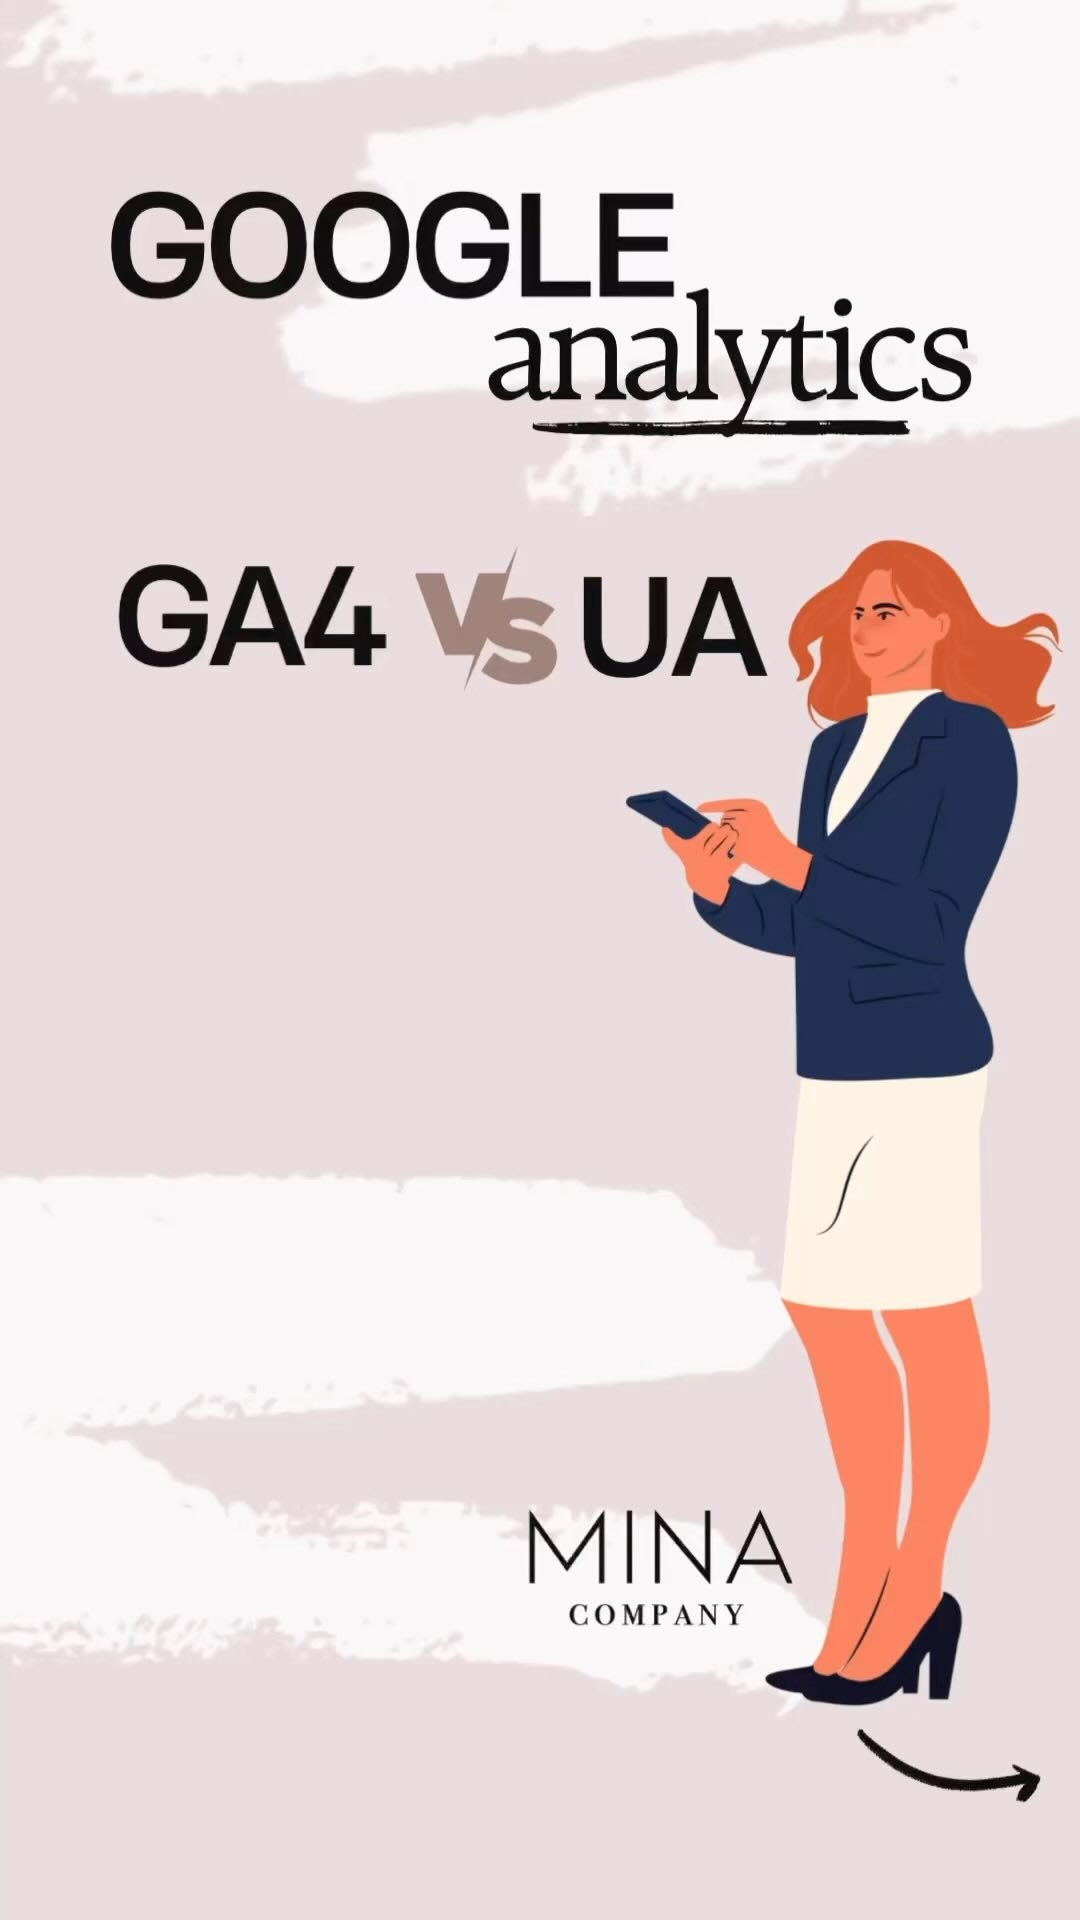 Feeling overwhelmed by the differences between Google Analytics 4 (GA4) and Universal Analytics (UA)? 🤯📊 

Don’t worry, we’re here to help! As a marketing agency, The Mina Company can help you navigate the complexities of GA4 and UA, so you can focus on growing your business. 🔍💪 With GA4, you can get a deeper understanding of customer behavior across platforms and devices, thanks to its AI and machine learning features. 💡🤖 However, GA4 works very differently from UA, and it can be challenging to switch from UA to GA4. 😓 That’s why we’re here to guide you through the process and help you make the most of GA4’s exciting features. 🔥🚀 

Contact us today to learn more about how we can help you level up your digital insights!

 #TheMinaCompany #MarketingAgency #GA4vsUA #DataTracking #DigitalInsights #MarketingMetrics #LovelandCOBusinesses #LovelandCOMarketing #LovelandCODigitalInsights #LovelandCOAnalytics #LovelandColorado